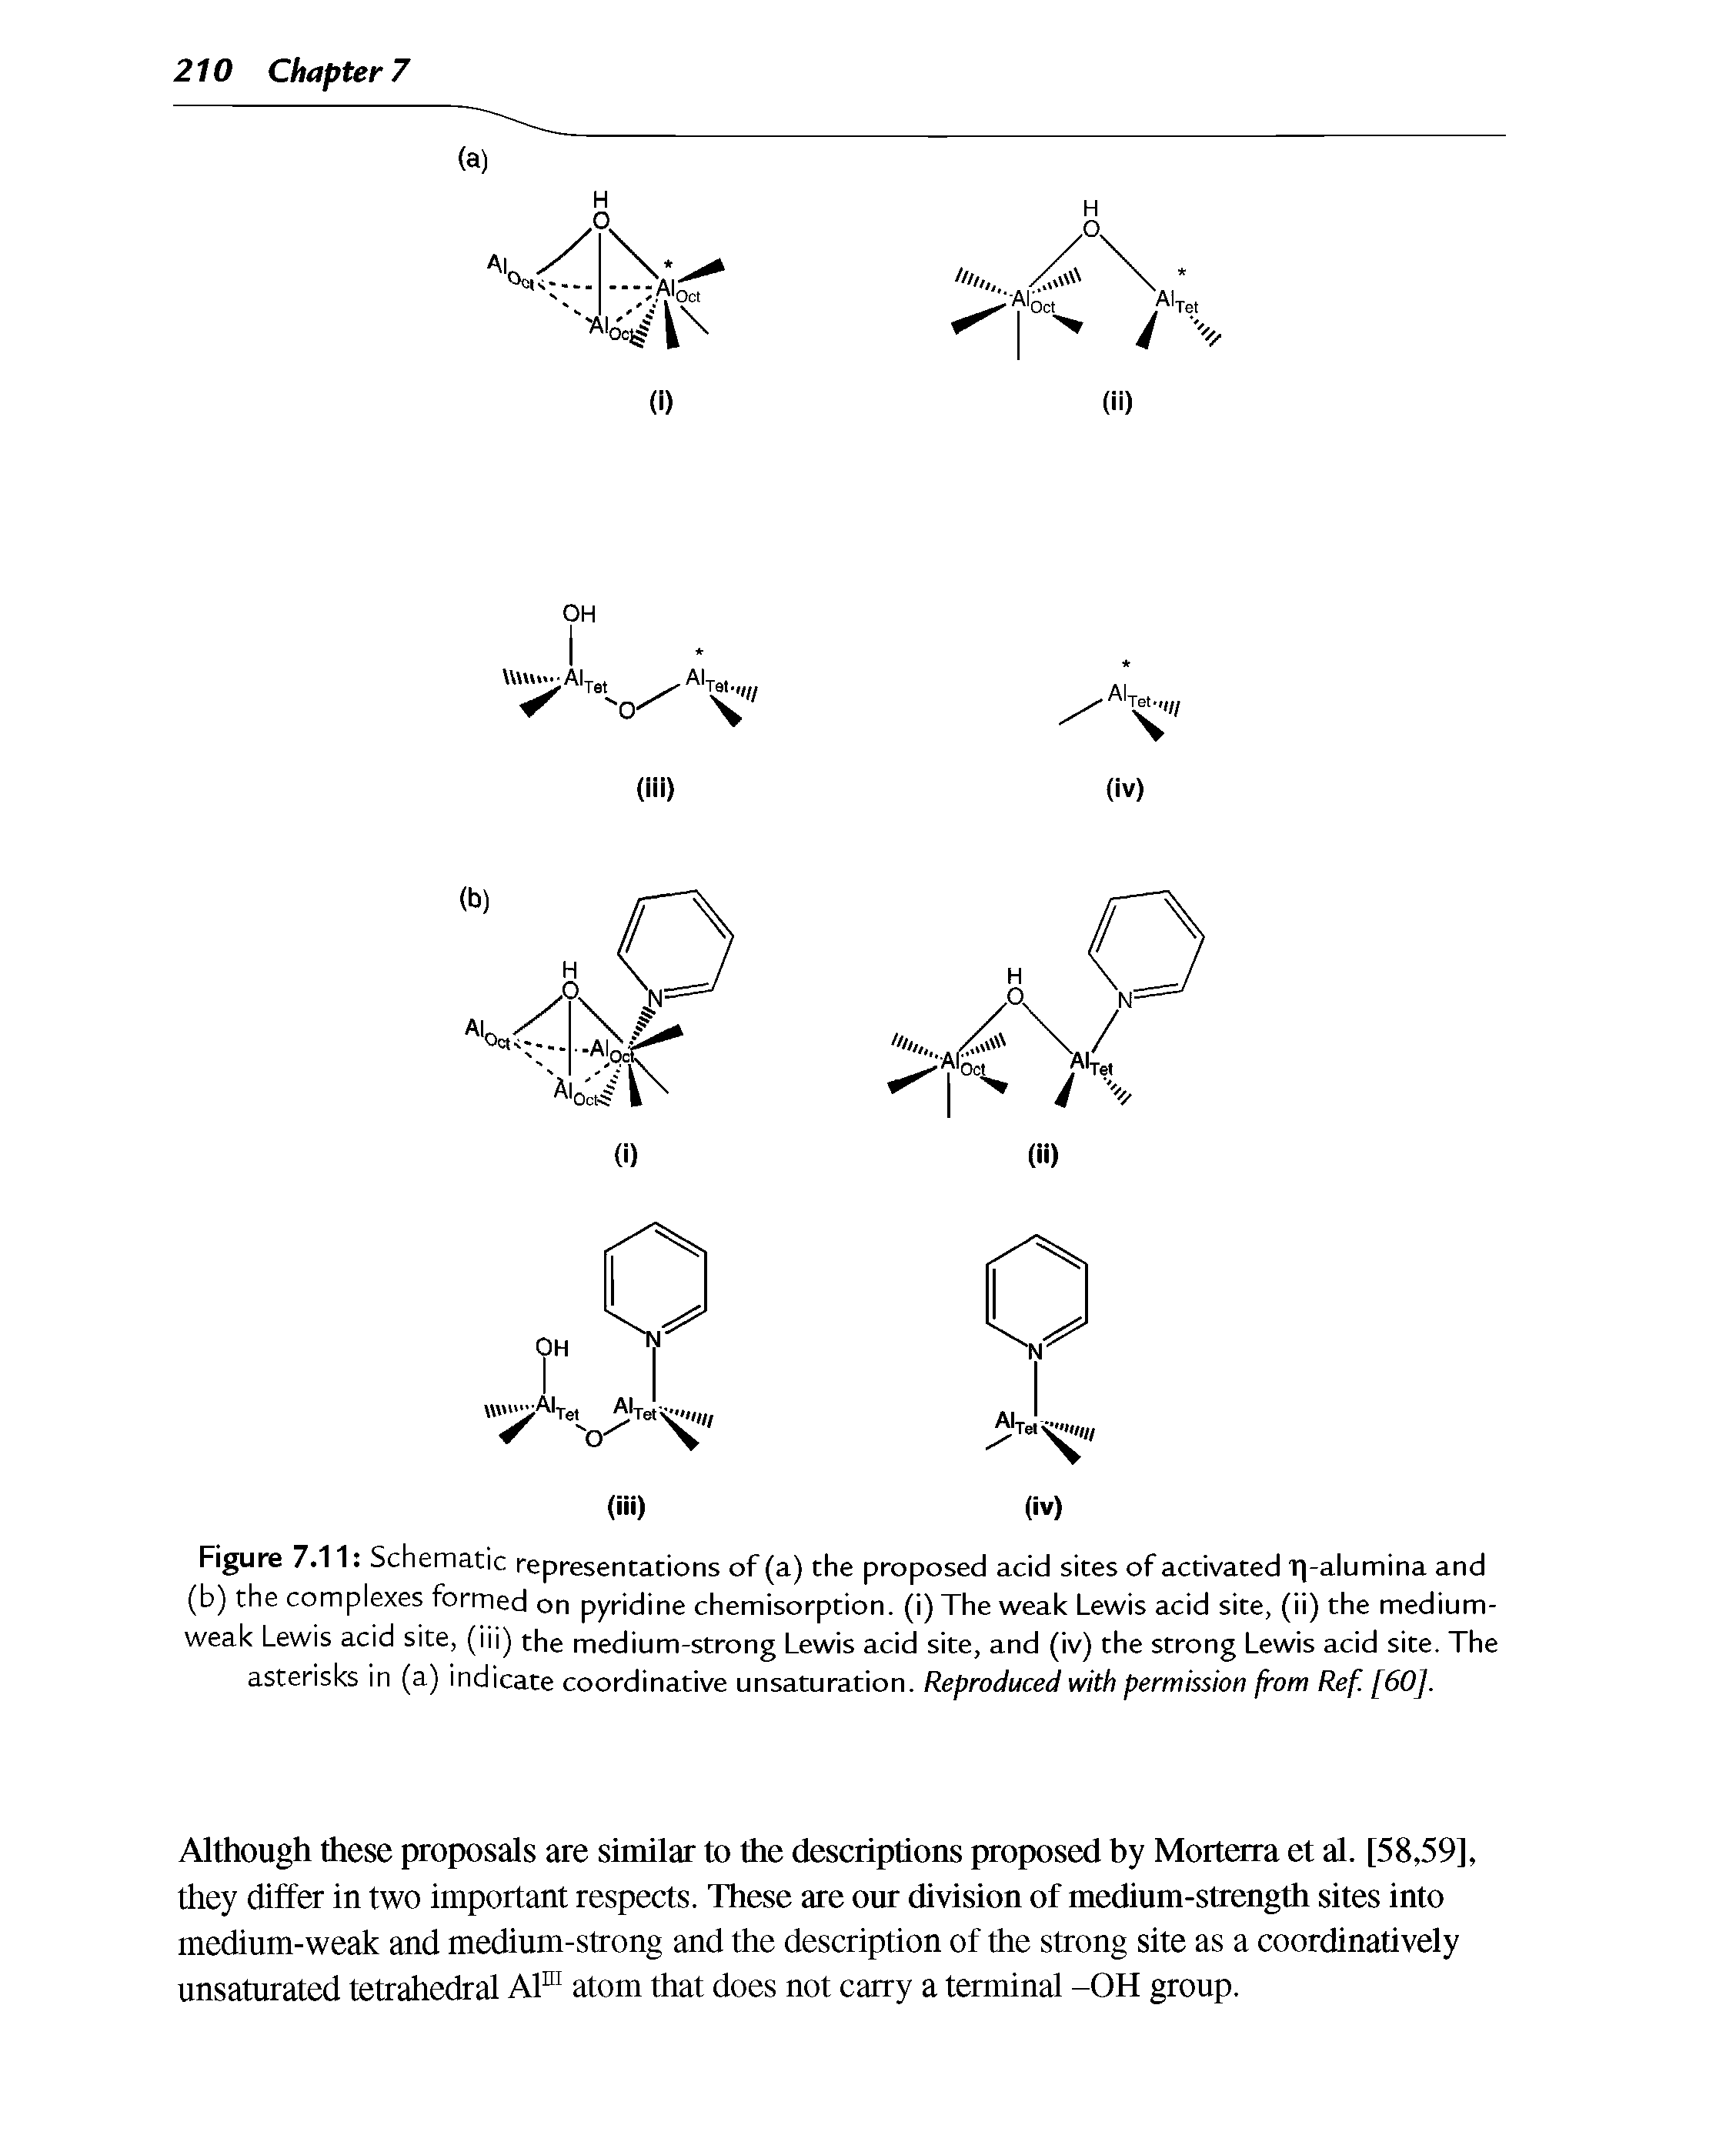 Figure 7.11 Schematic representations of (a) the proposed acid sites of activated T -alumina and (b) the complexes formed on pyridine chemisorption, (i) The weak Lewis acid site, (ii) the medium-weak Lewis acid site, (iii) the medium-strong Lewis acid site, and (iv) the strong Lewis acid site. The asterisks in (a) indicate coordinative unsaturation. Reproduced with permission from Ref. [60].